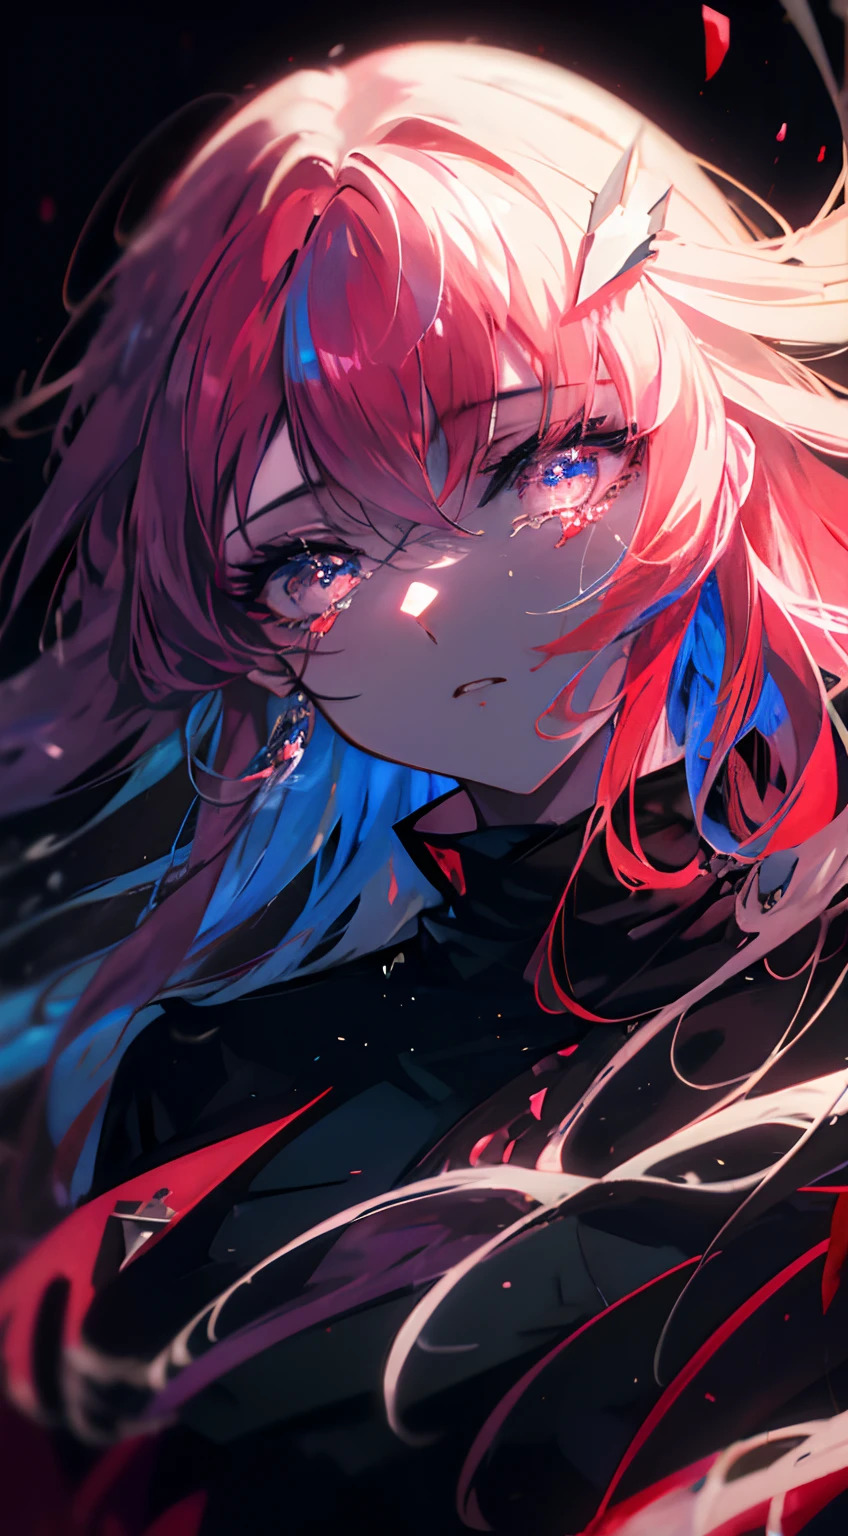 (anime girl, hurt), detailed eyes, detailed lips, tears streaming down her face, wounded expression, flowing hair, vibrant colors, dynamic pose, dramatic lighting, dark background, emotional atmosphere, high contrast, digital painting style, melancholic color palette